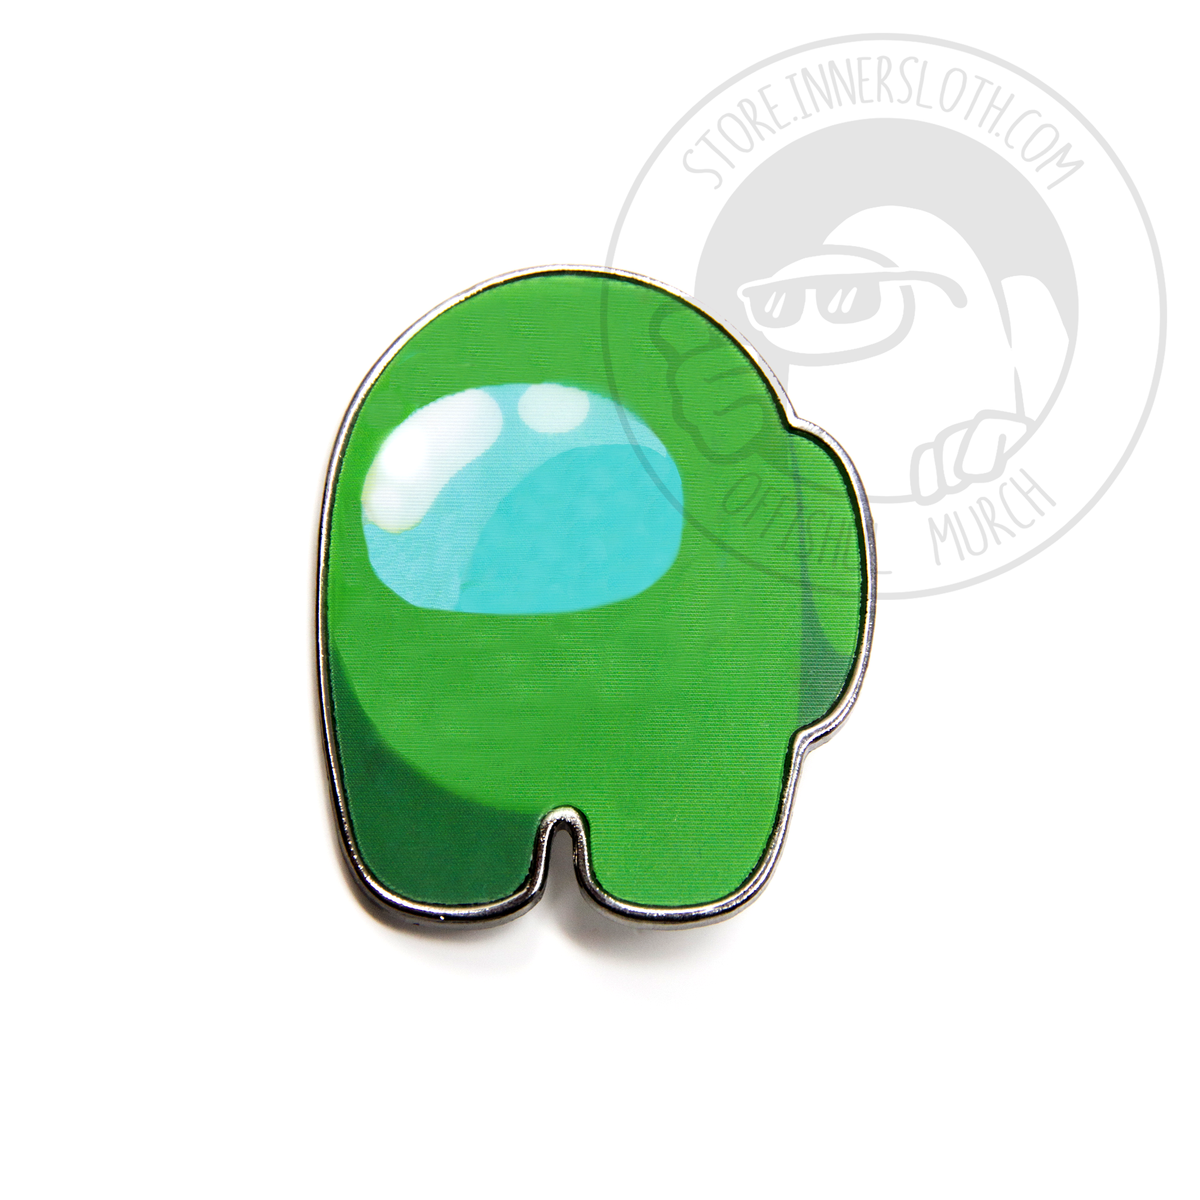 A still image of the Among Us: Lenticular Crewmate Pin in Green.